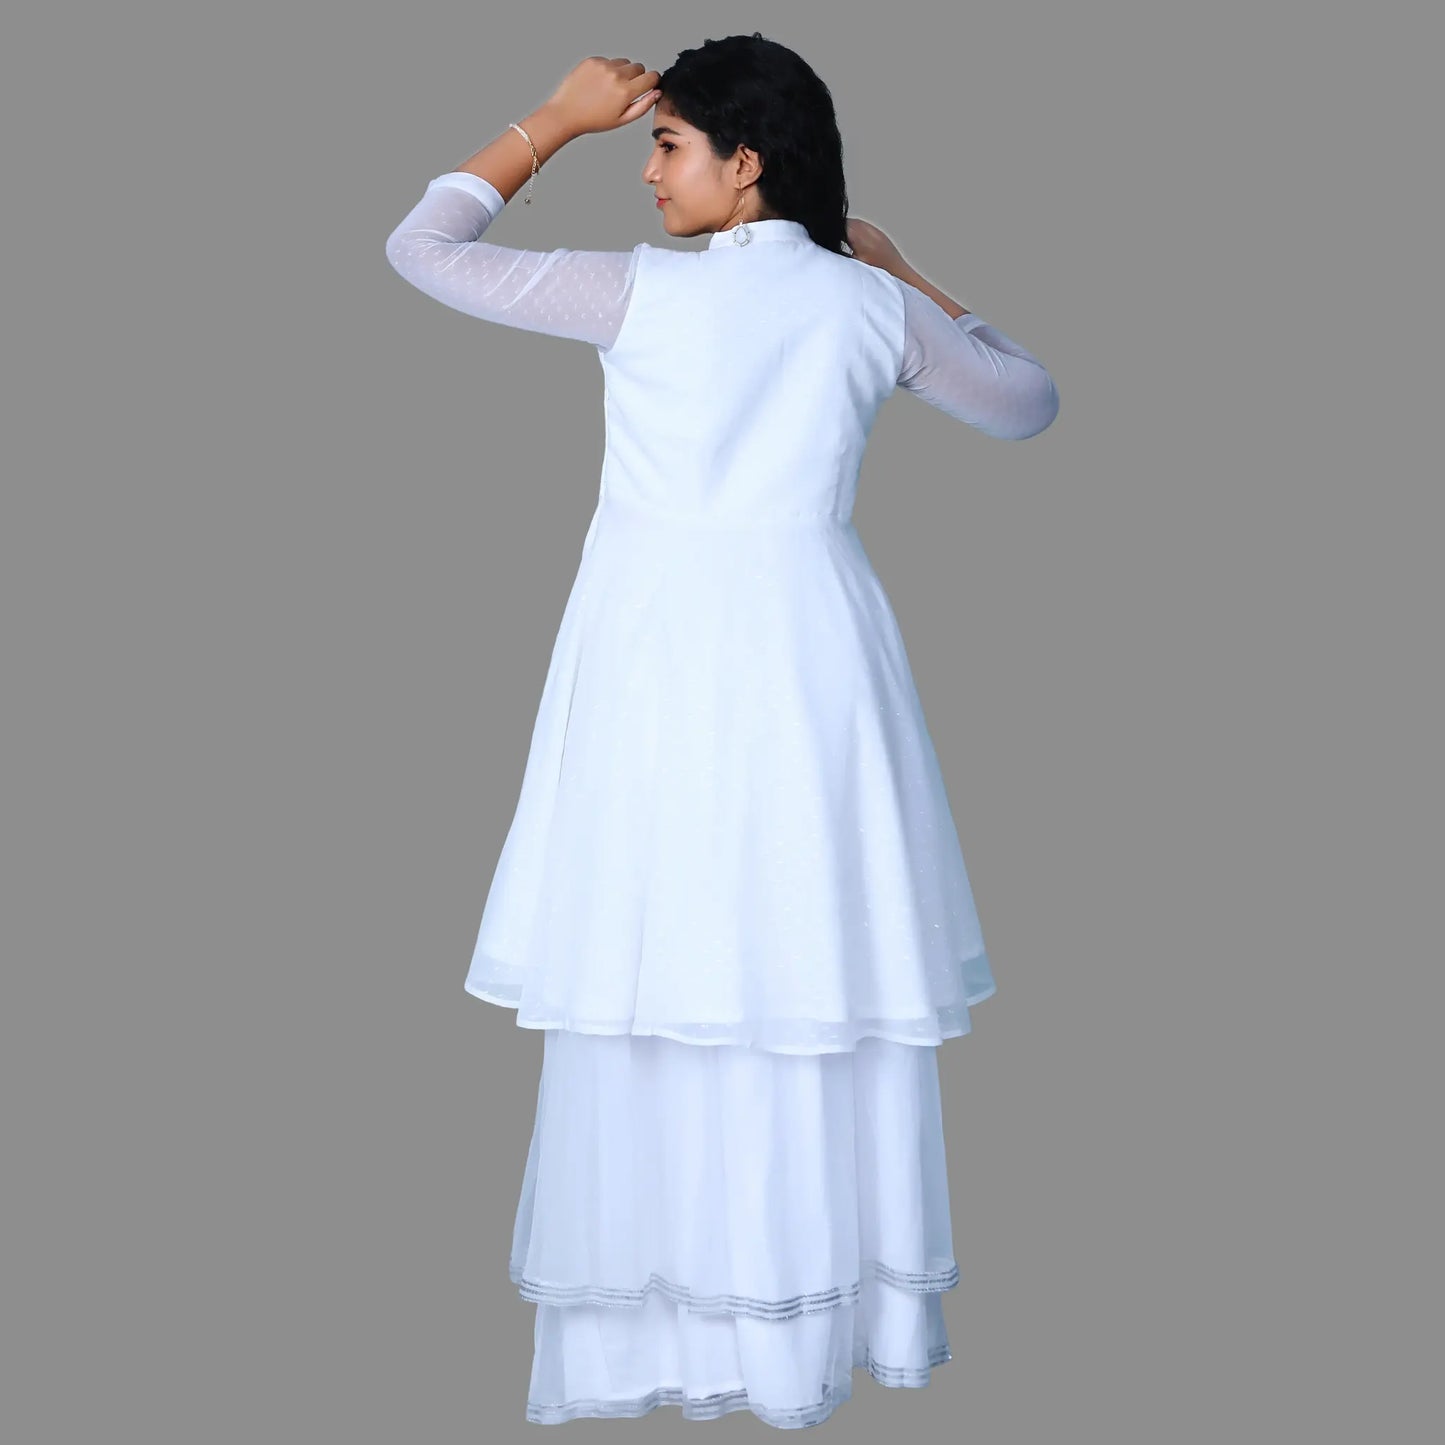 Women's White Chinese Collar Neck 3 layered Gown | S3G1057